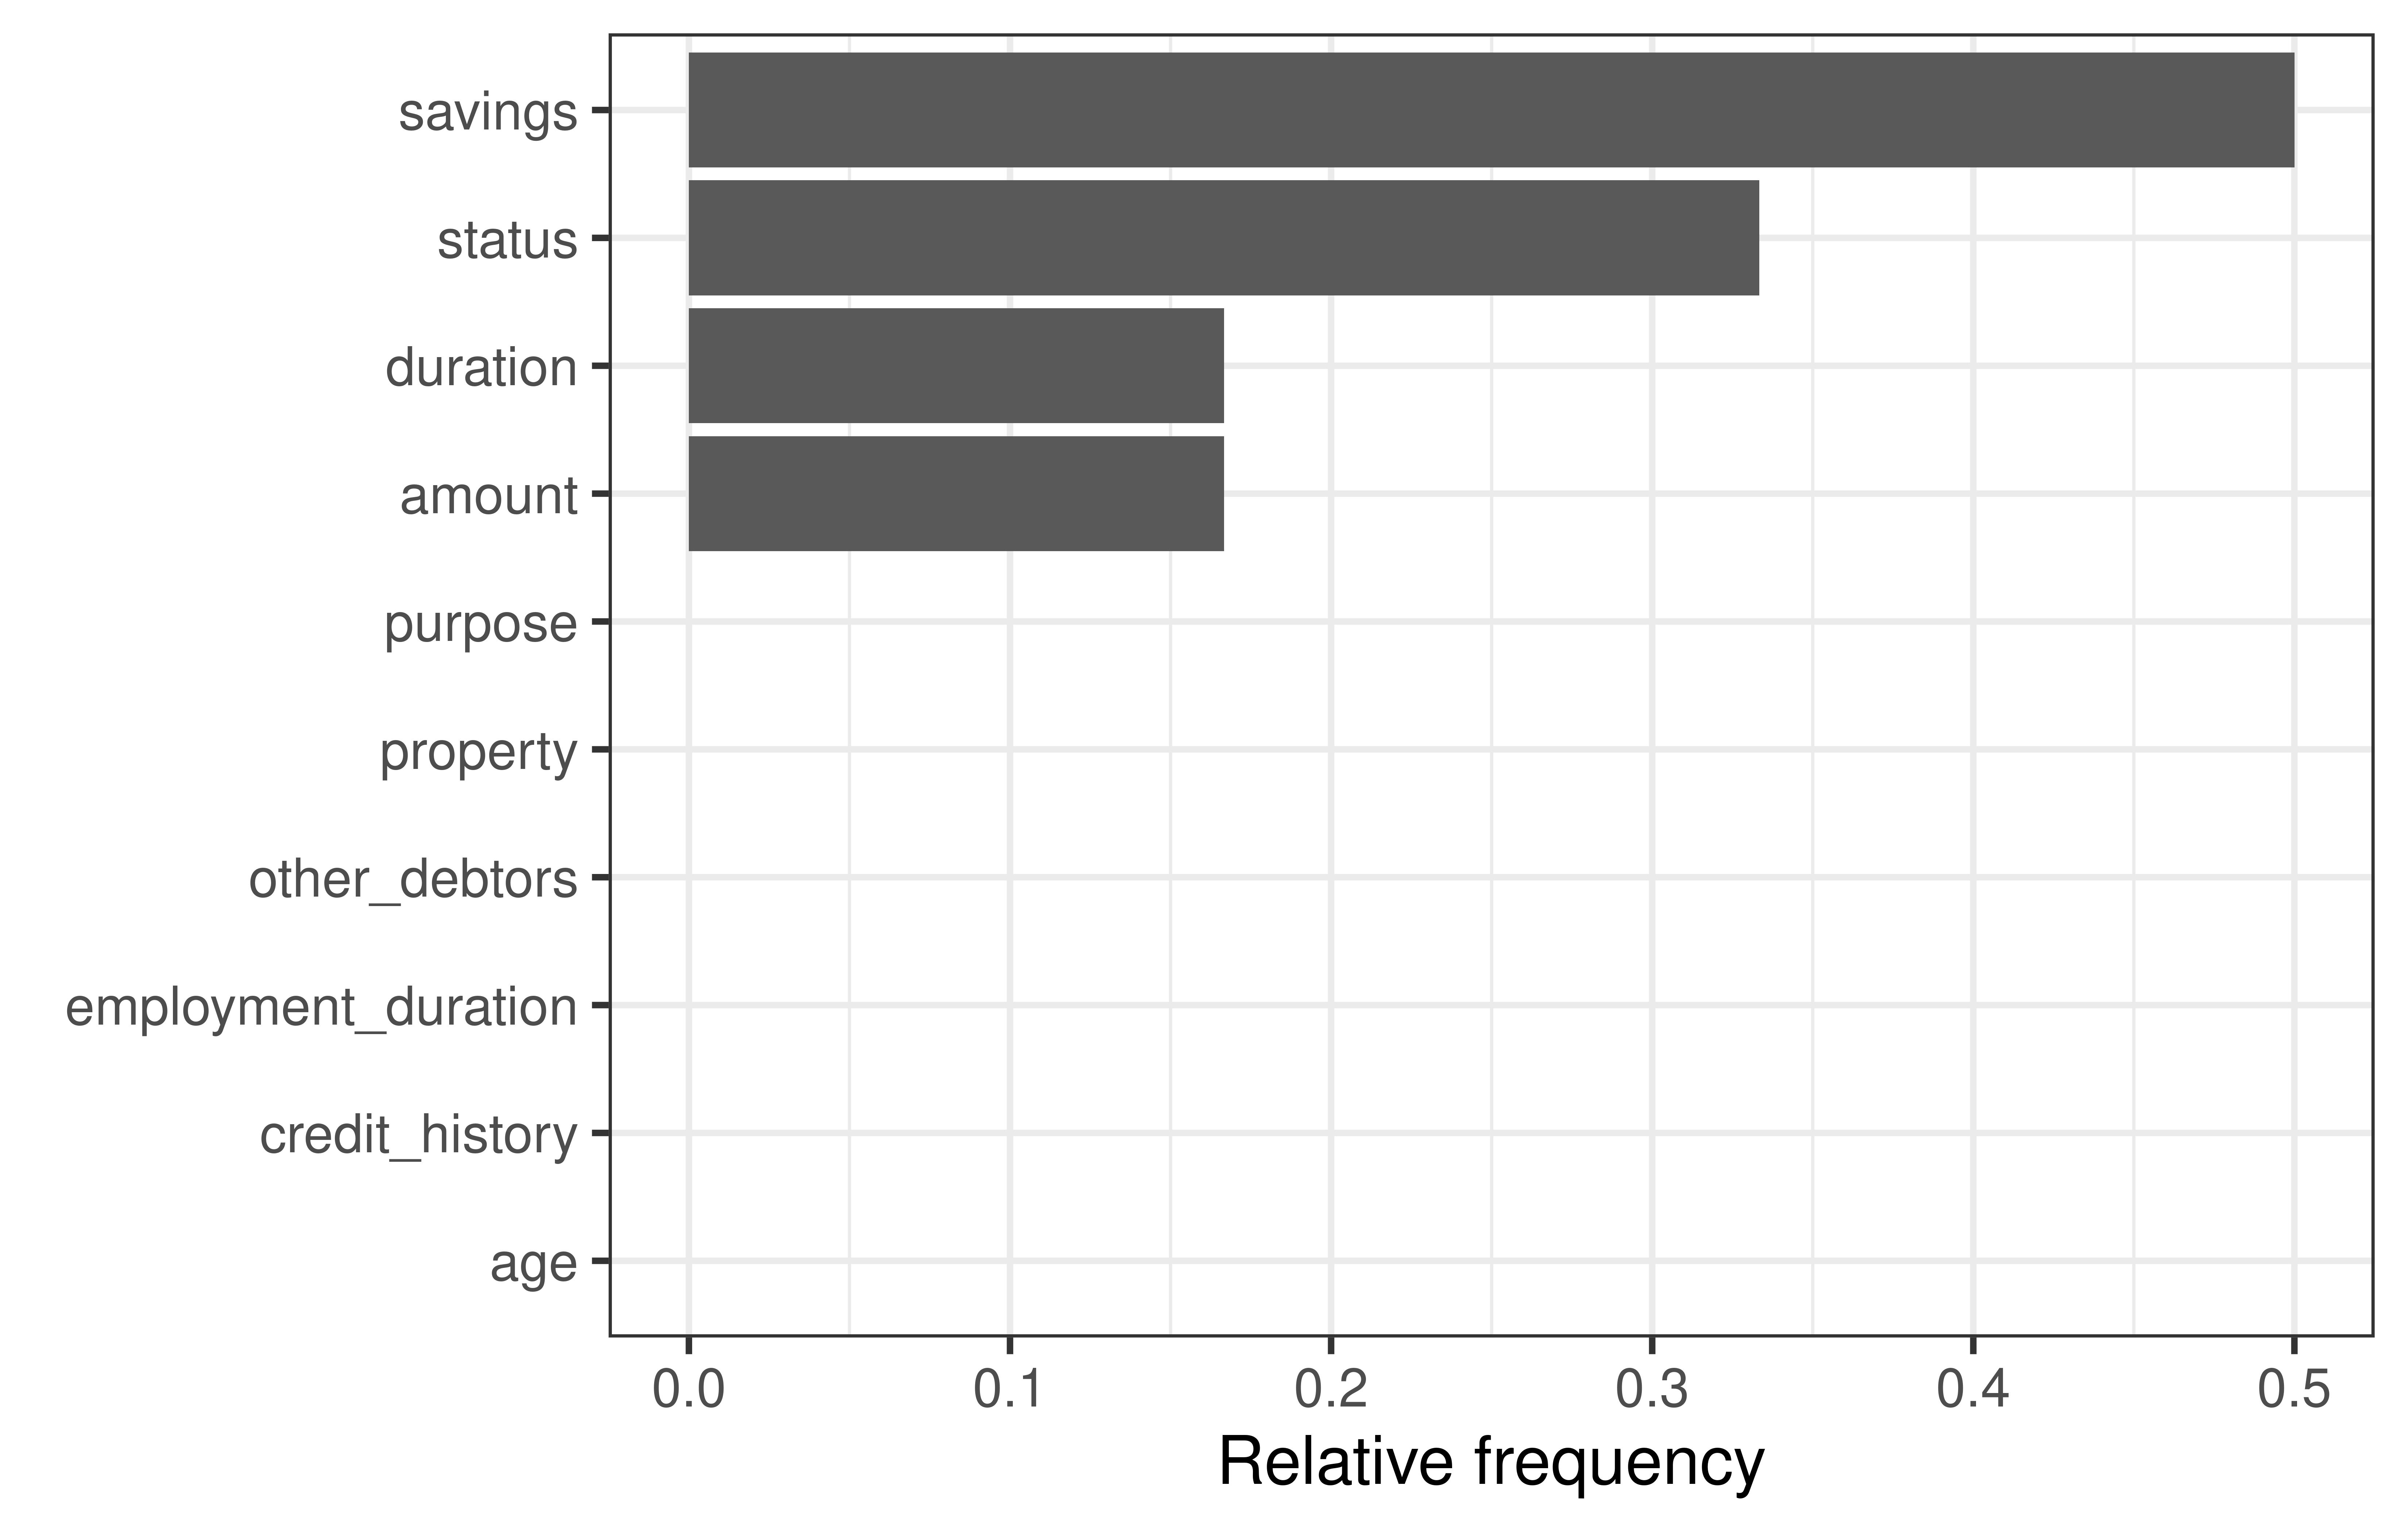 x-axis says 'relative frequency' and ranges from 0 to just over 0.3. Changed features were 'status' (in 35% of the counterfactuals), 'savings' (35%), 'purpose' (10%), 'employment_duration' (10%), 'duration' (10%), and 'amount' (10%).